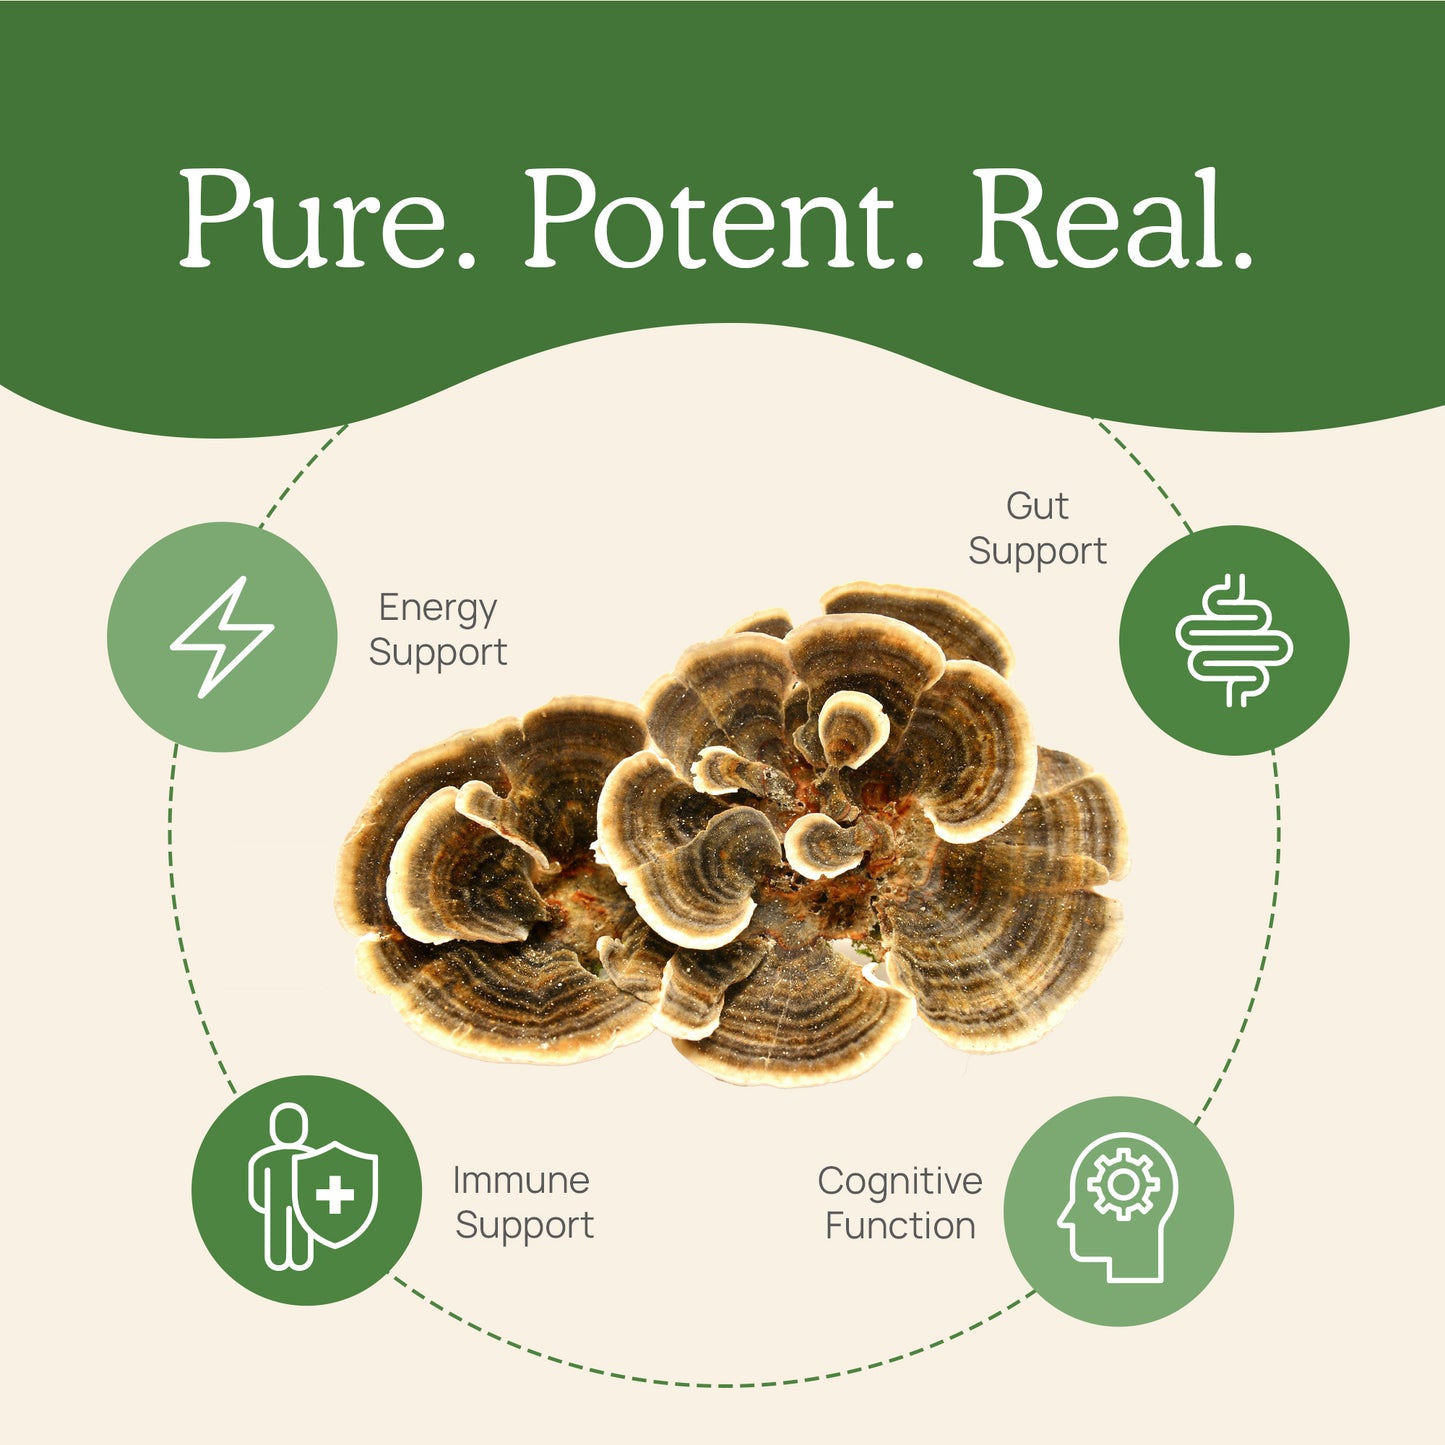 A poster featuring the words "Turkey Tail Extract Capsules for Pets" by Real Mushrooms.